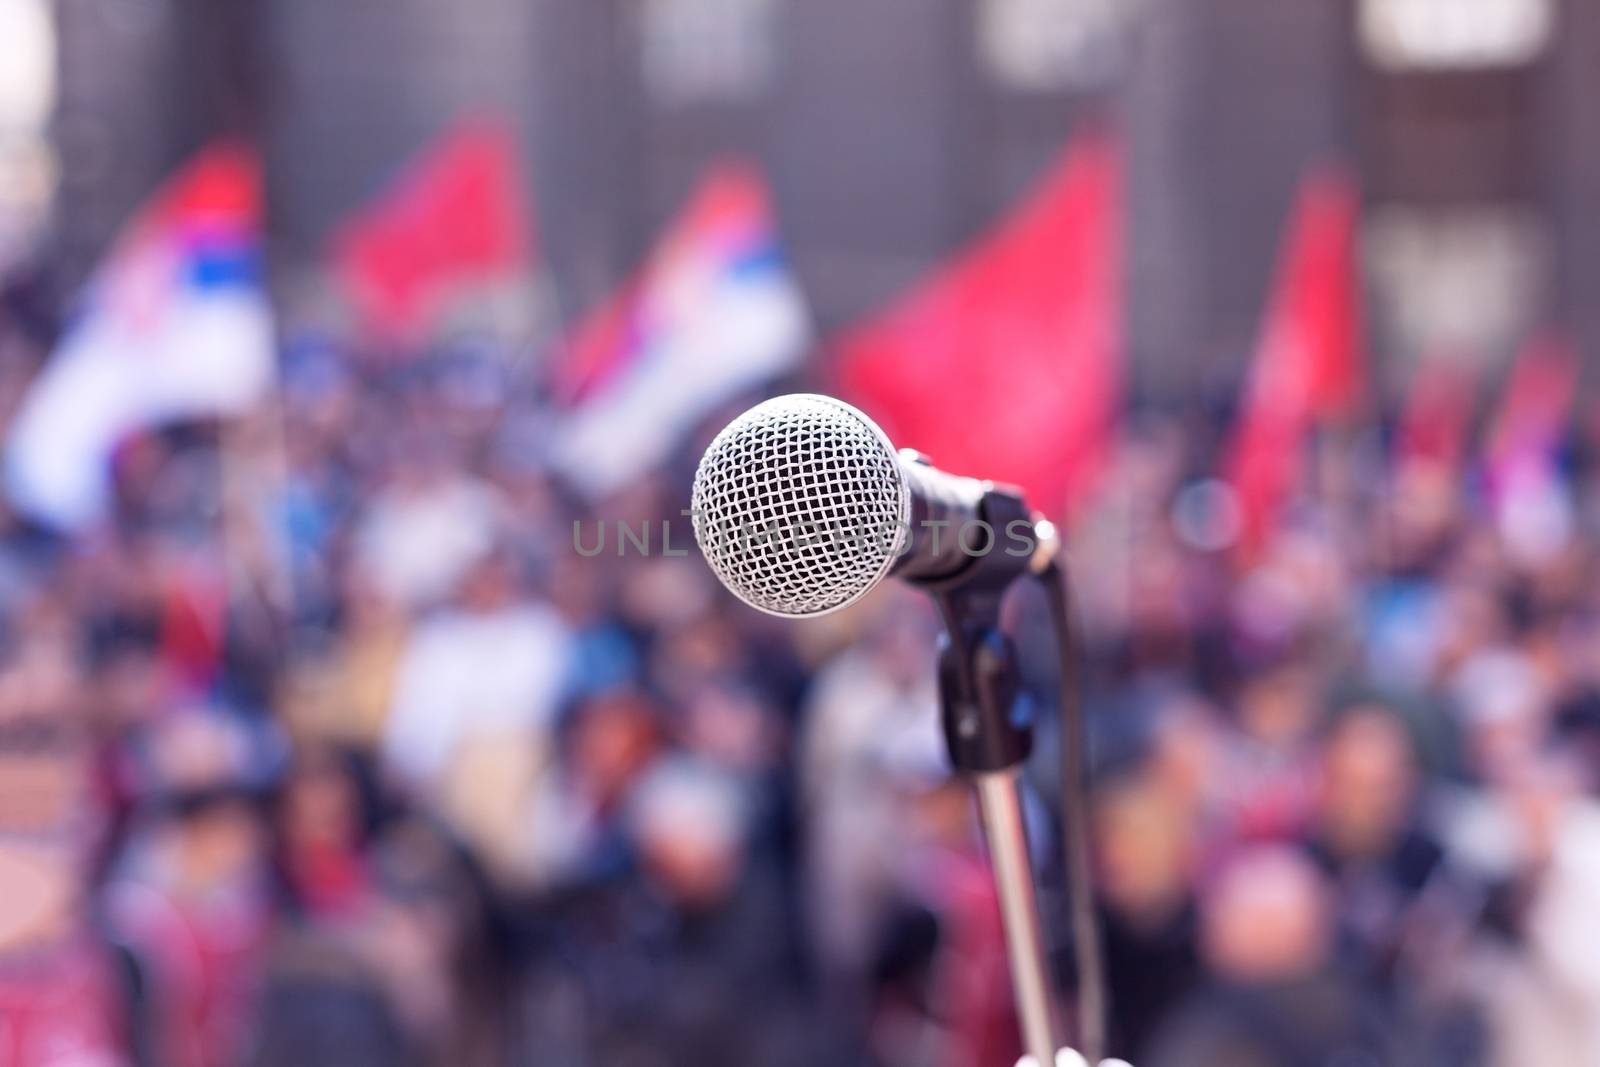 Microphone in focus against blurred crowd